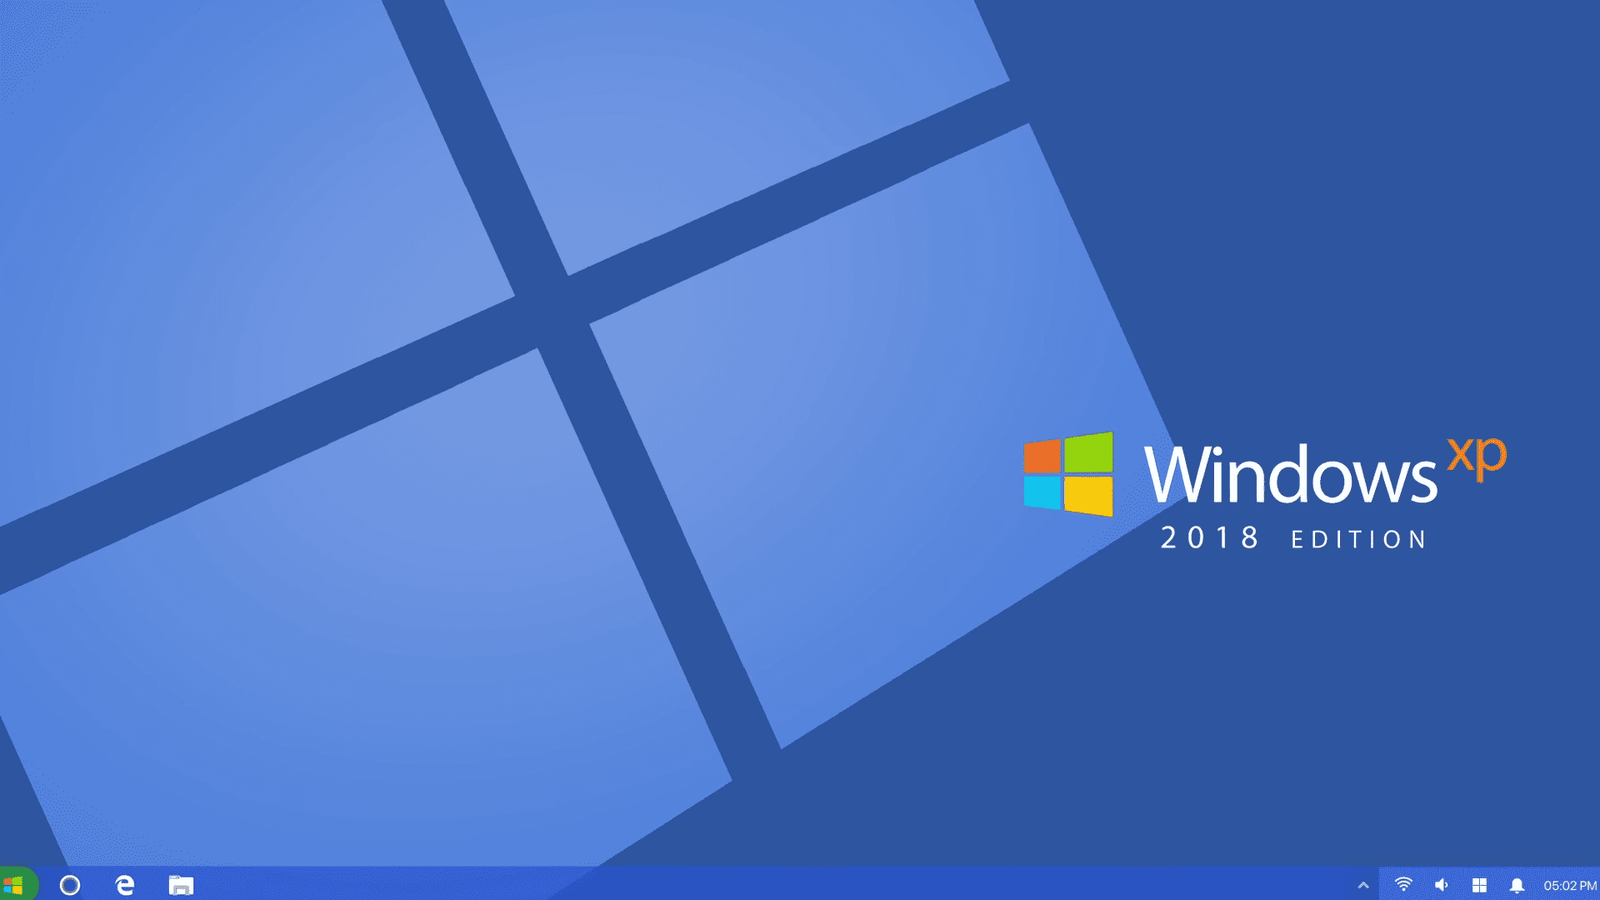 Windows XP 2018 Edition : This Concept Video Will Make You Fall In Love With It